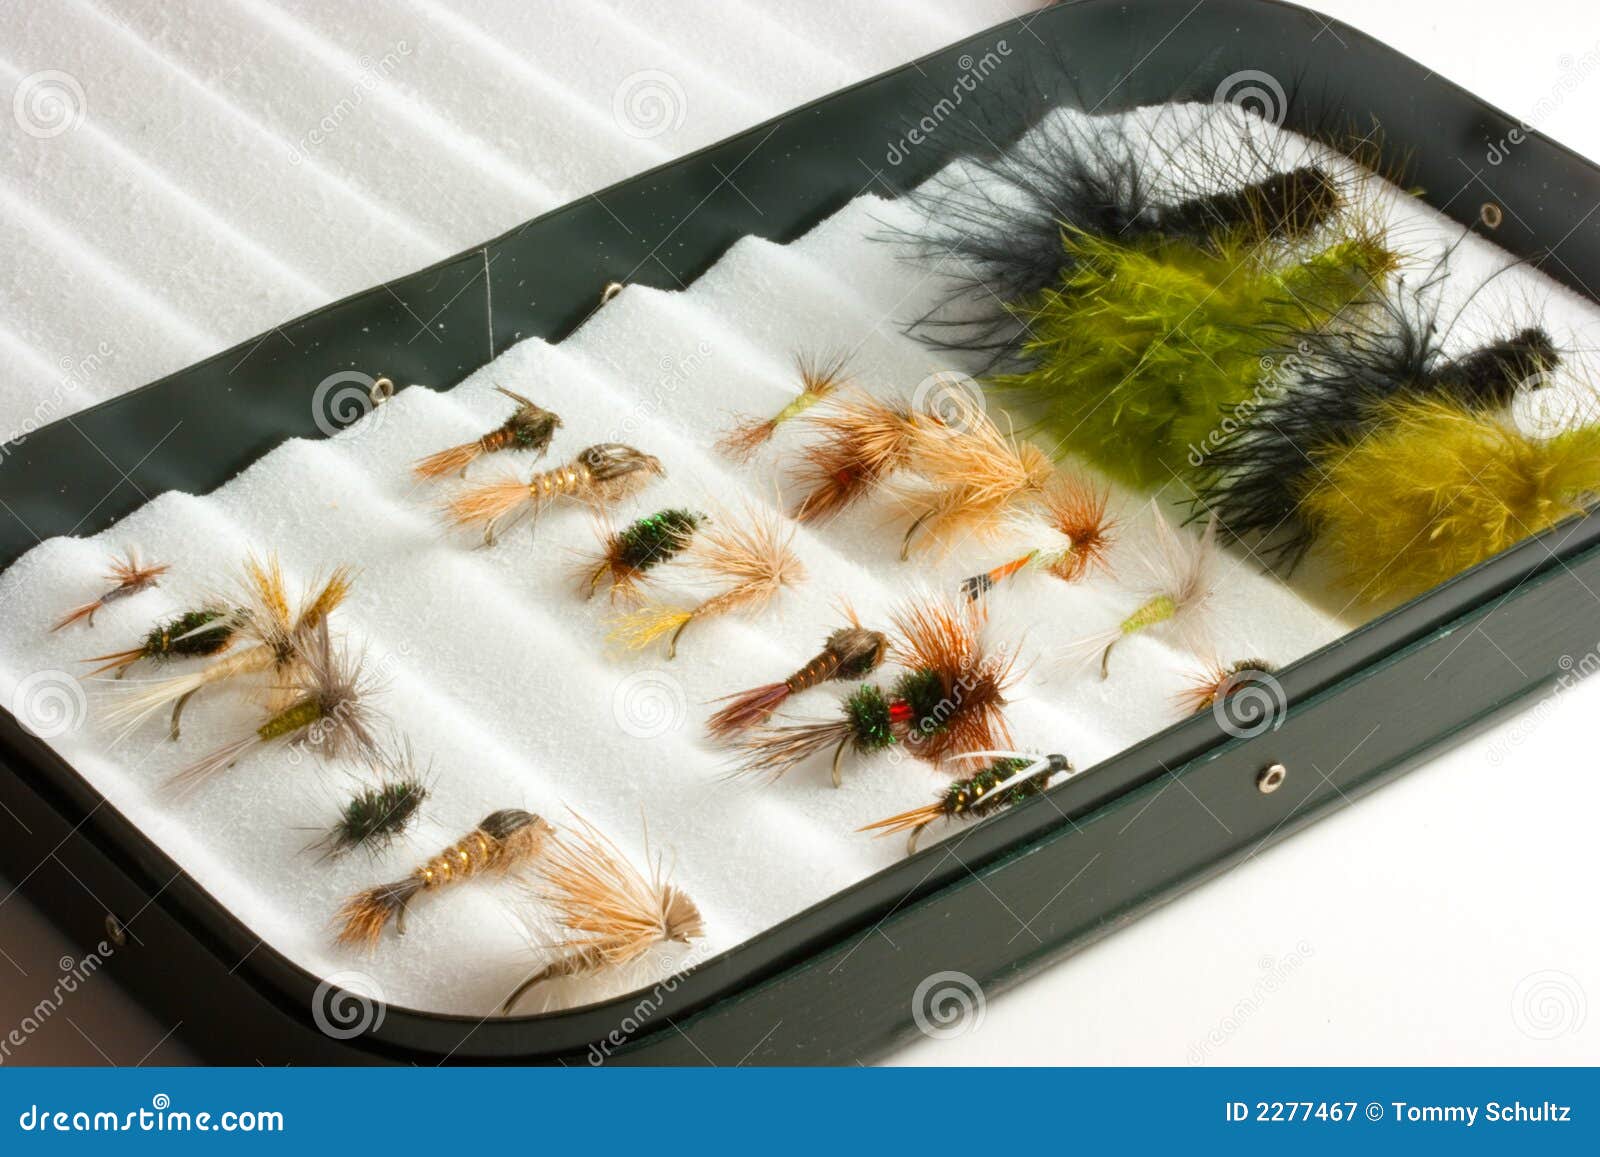 https://thumbs.dreamstime.com/z/trout-lures-fly-box-2277467.jpg